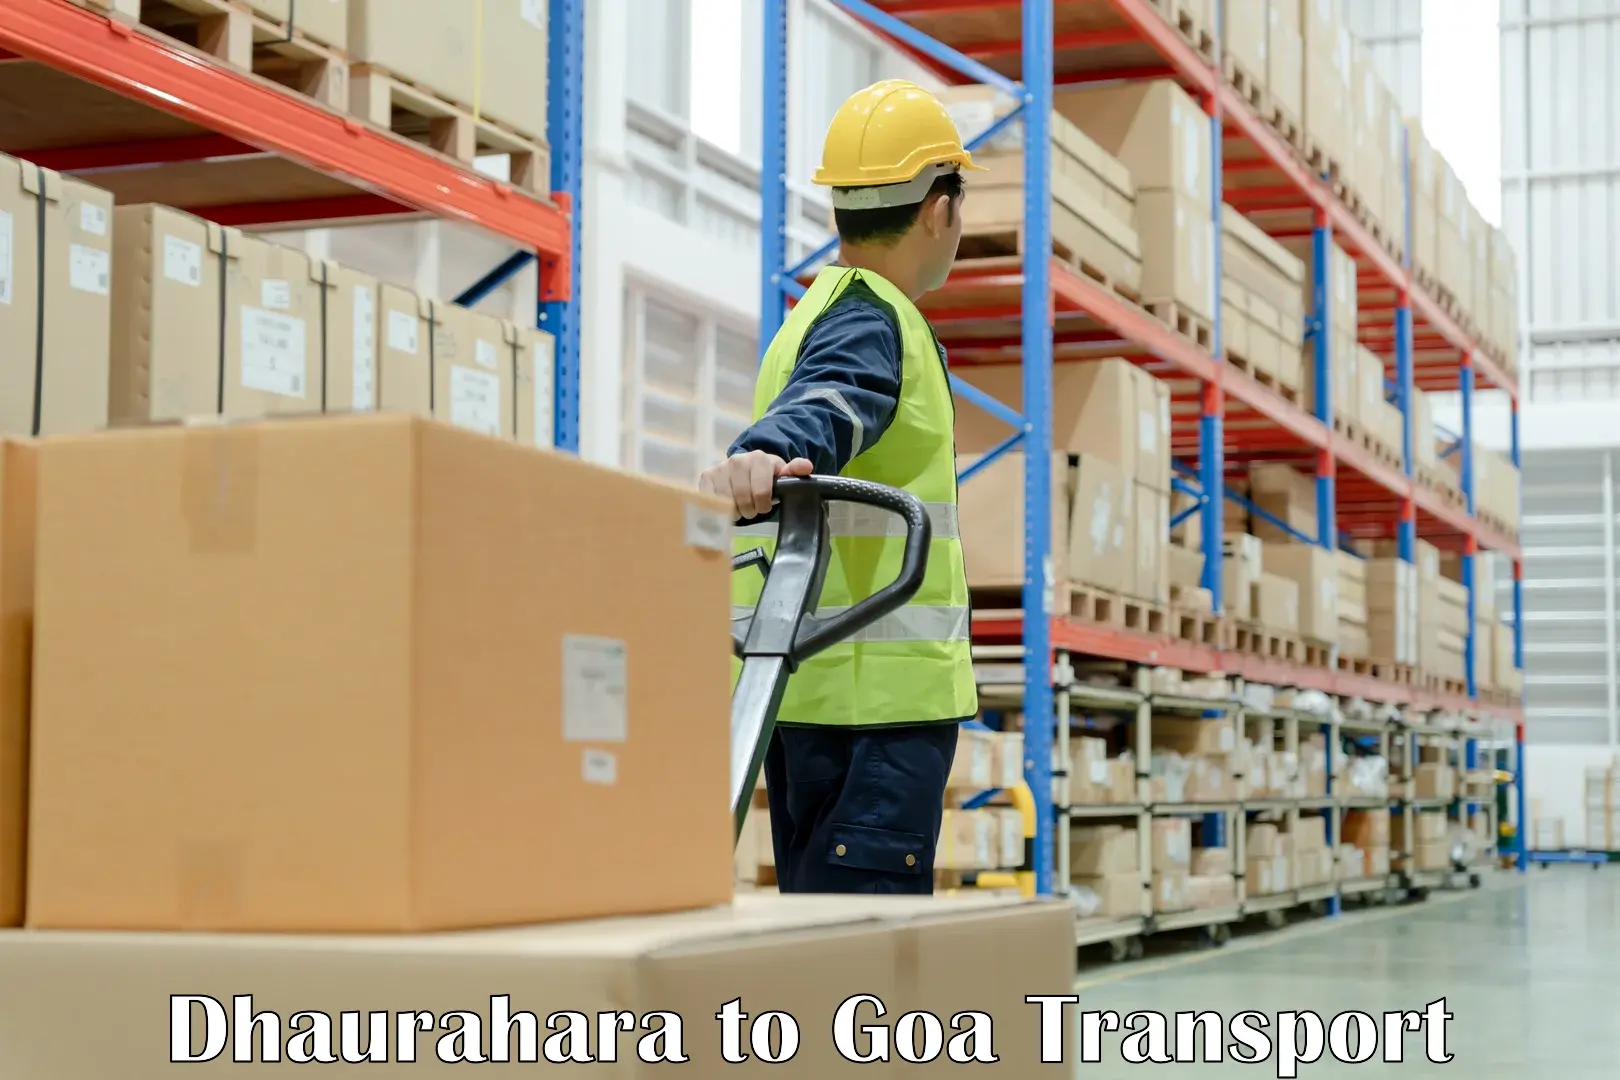 Road transport online services Dhaurahara to Goa University